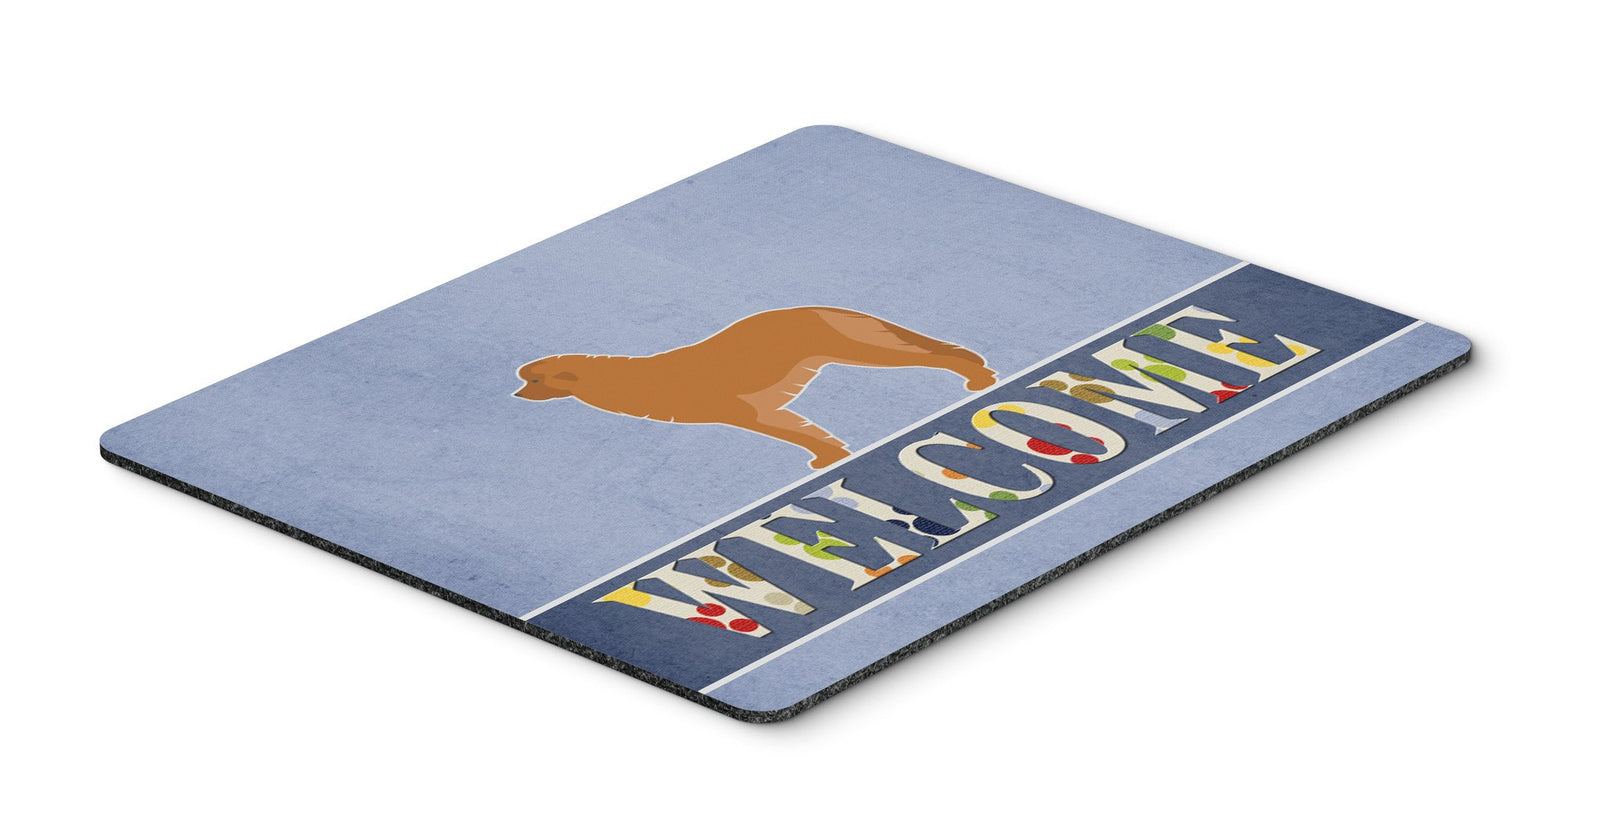 Leonberger Welcome Mouse Pad, Hot Pad or Trivet BB5562MP by Caroline's Treasures